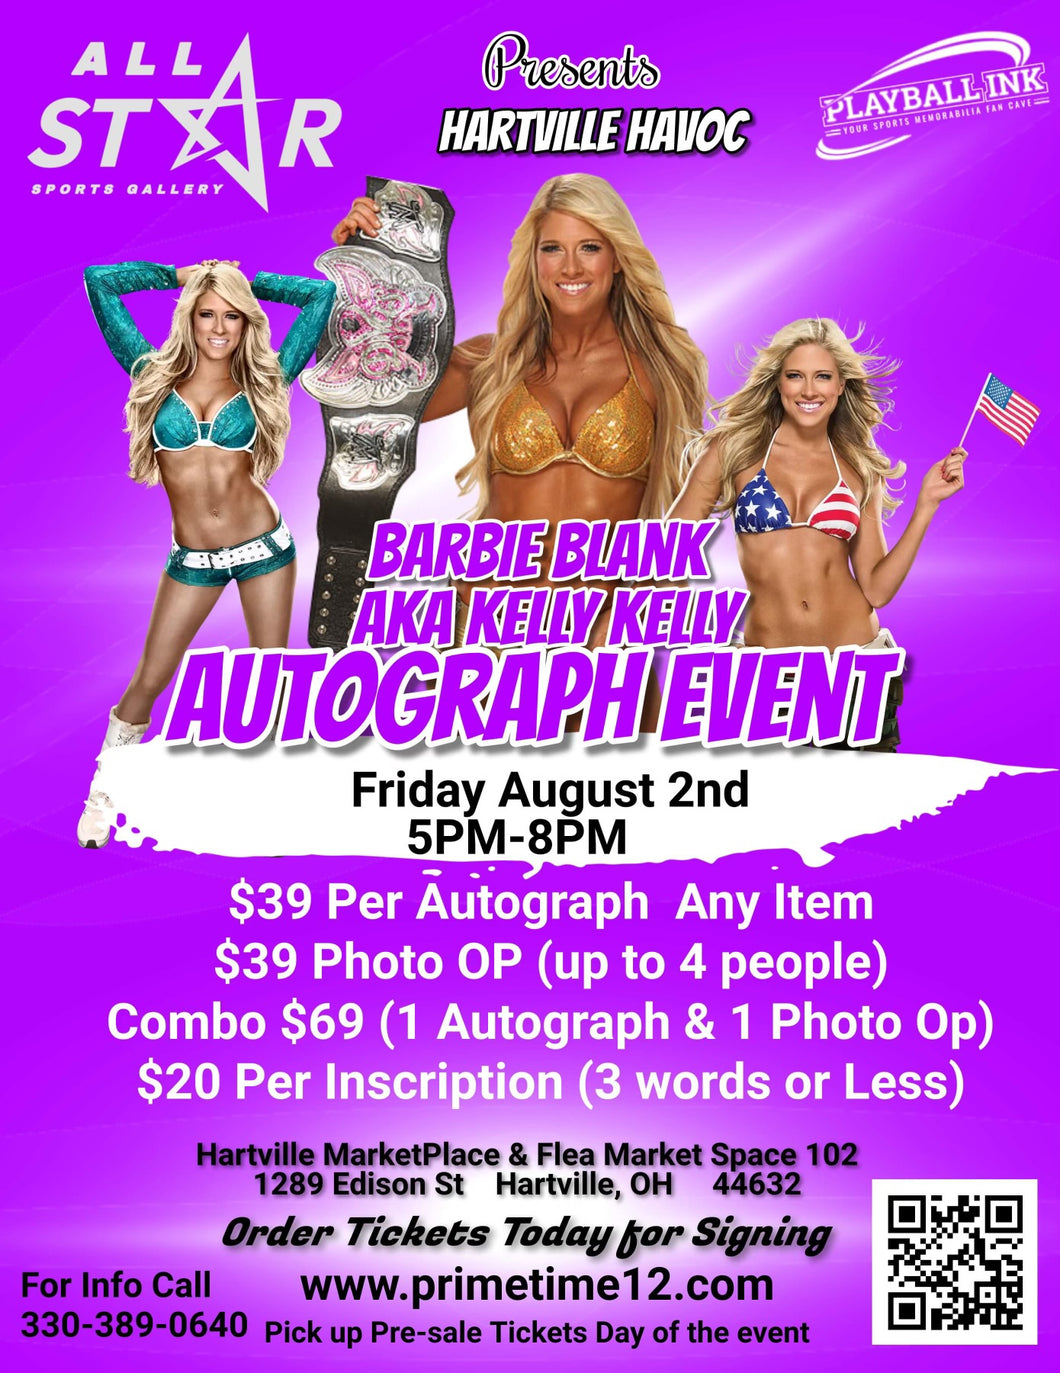 Barbie Blank AKA KELLY KELLY Pre-Sale ticket for autograph signing & photo op COMBO GET ANY 1 ITEM SIGNED PLUS PHOTO TAKEN WITH HER